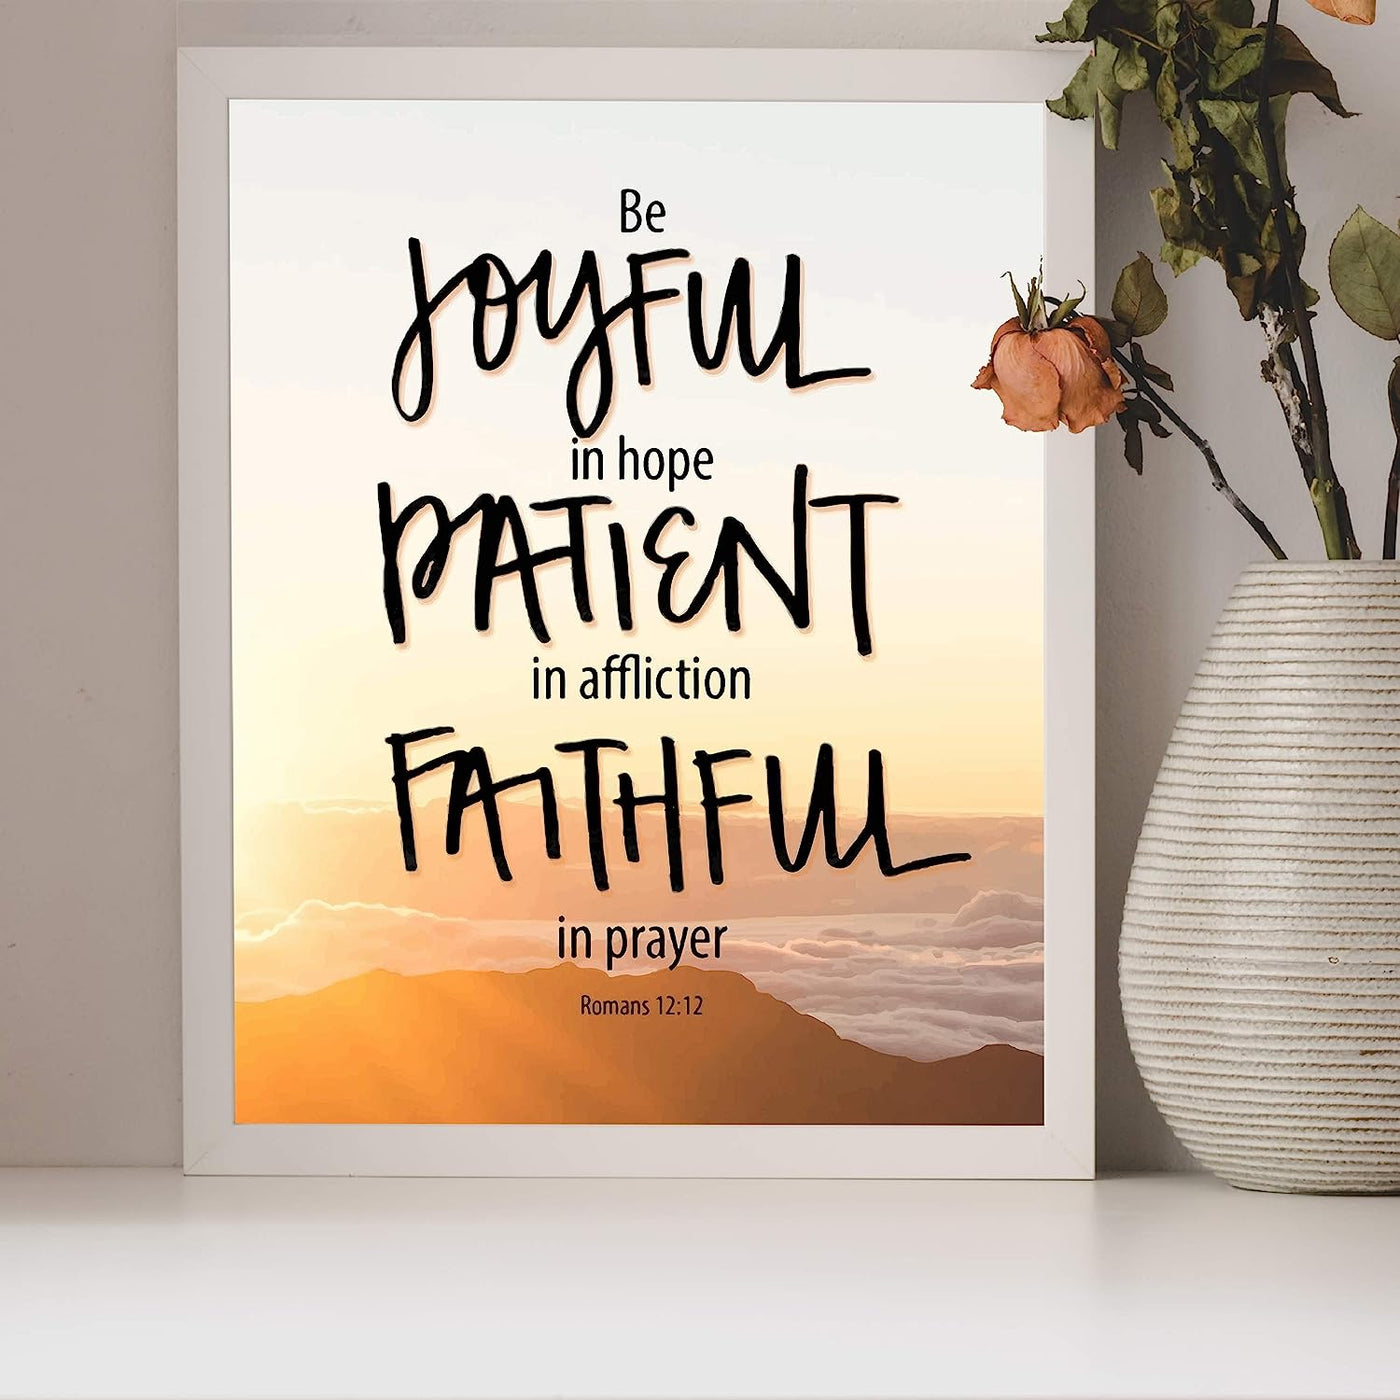 Romans 12:12-"Be Joyful In Hope-Patient-Faithful"-Bible Verse Wall Art -8 x 10" Christian Poster Print-Ready to Frame. Typographic Design. Inspirational Home-Office-Church Decor! Great Gift of Faith!